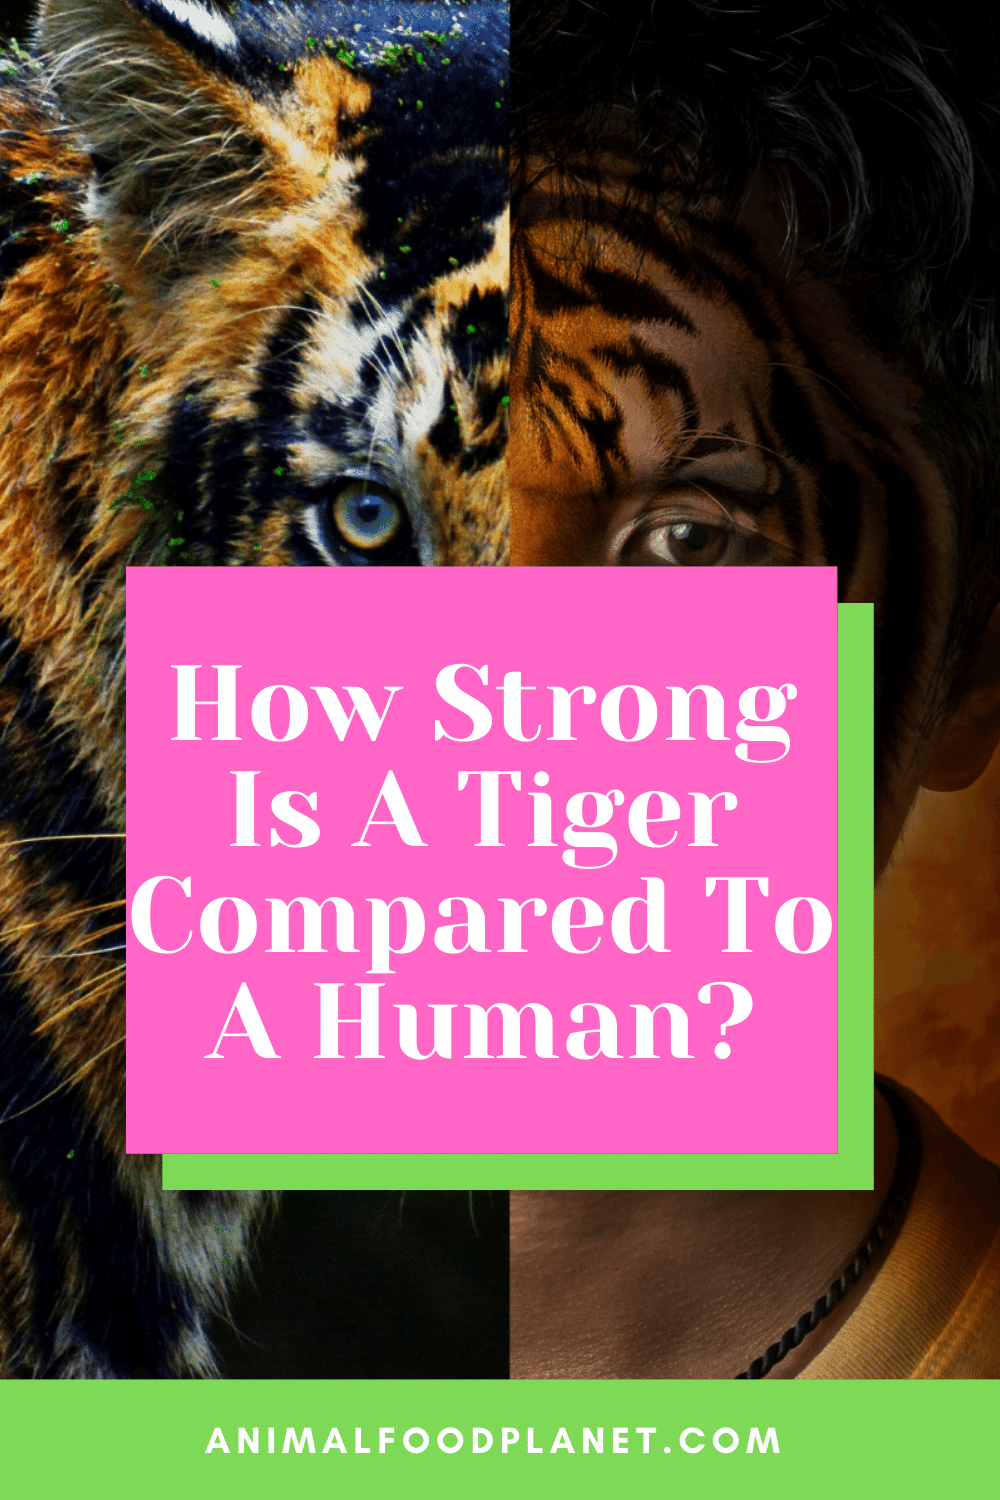 How Strong Is A Tiger Compared To A Human?